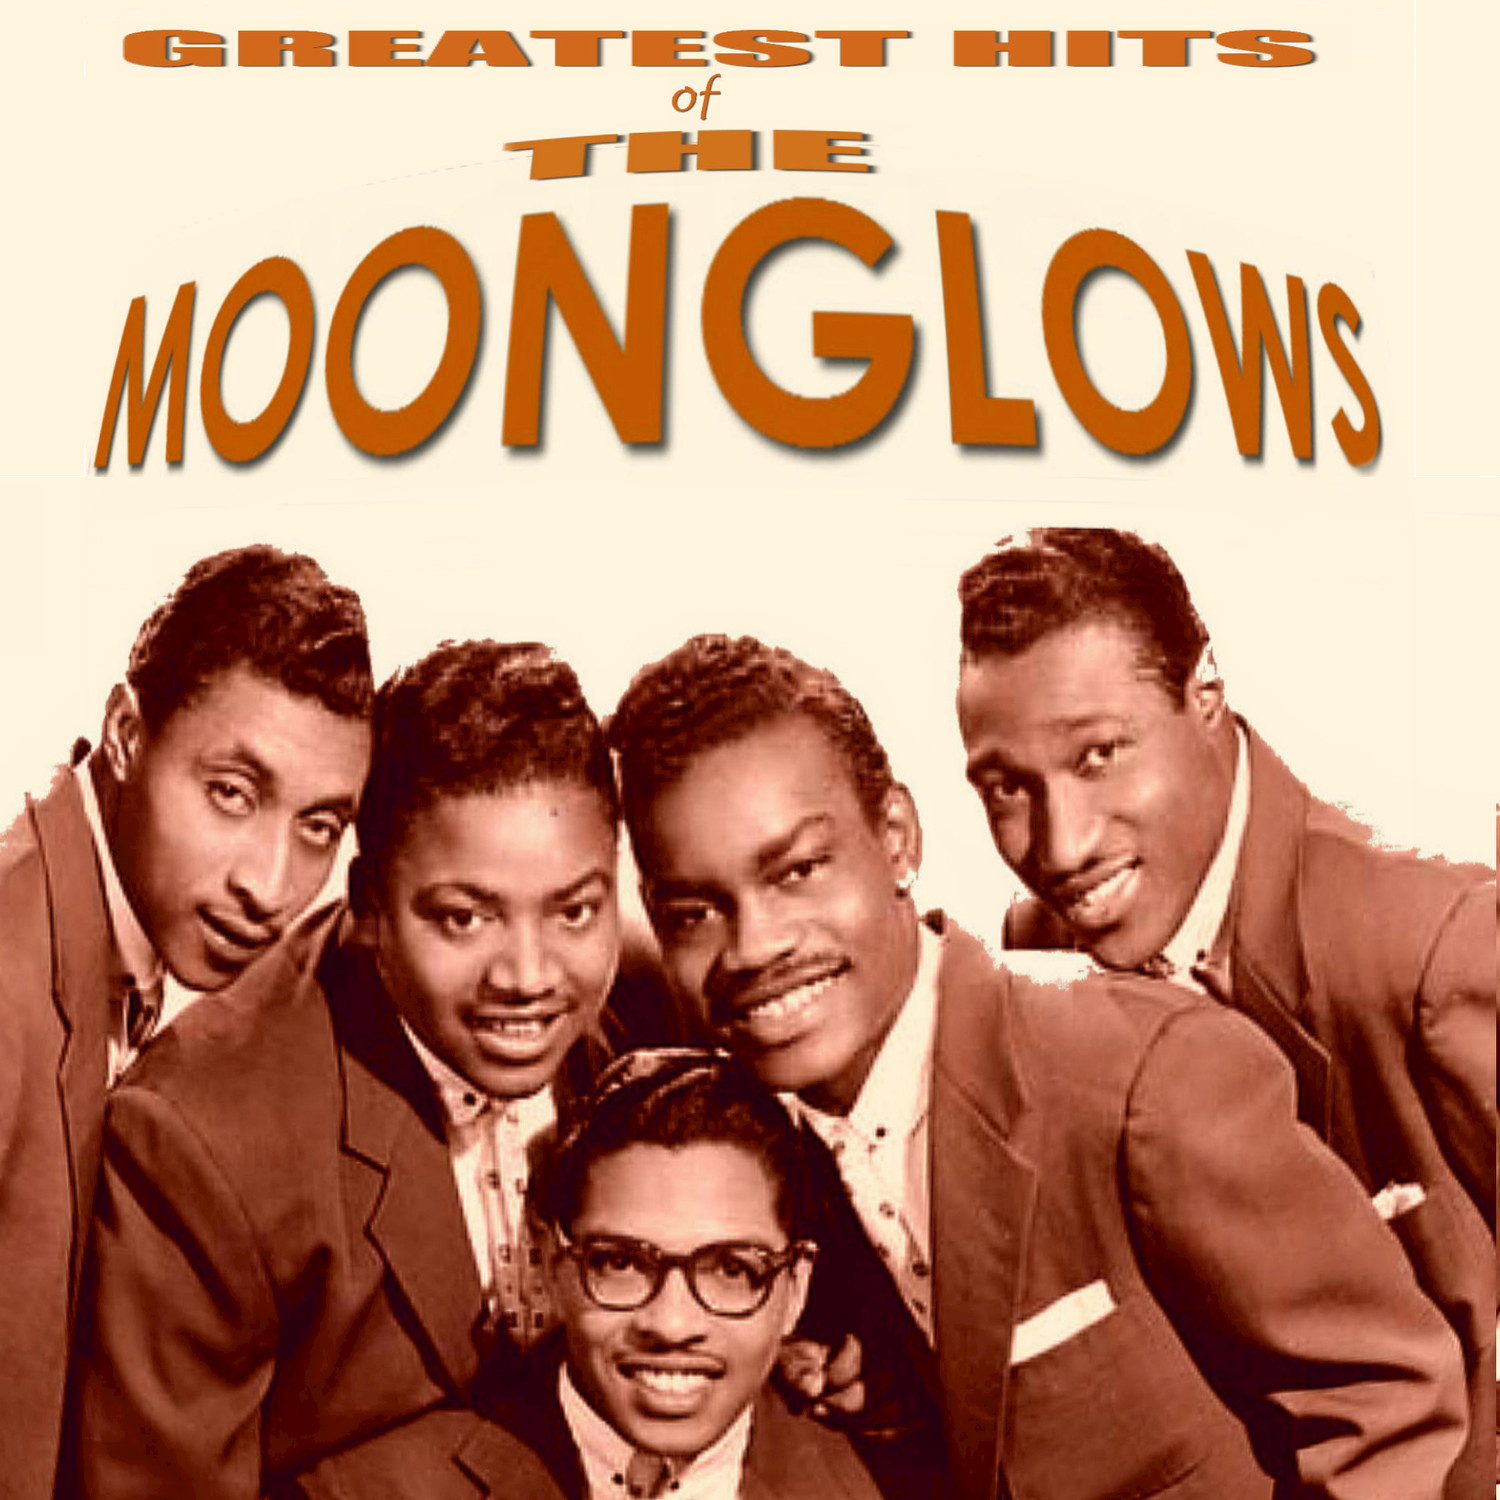 The Greatest Hits of the Moonglows